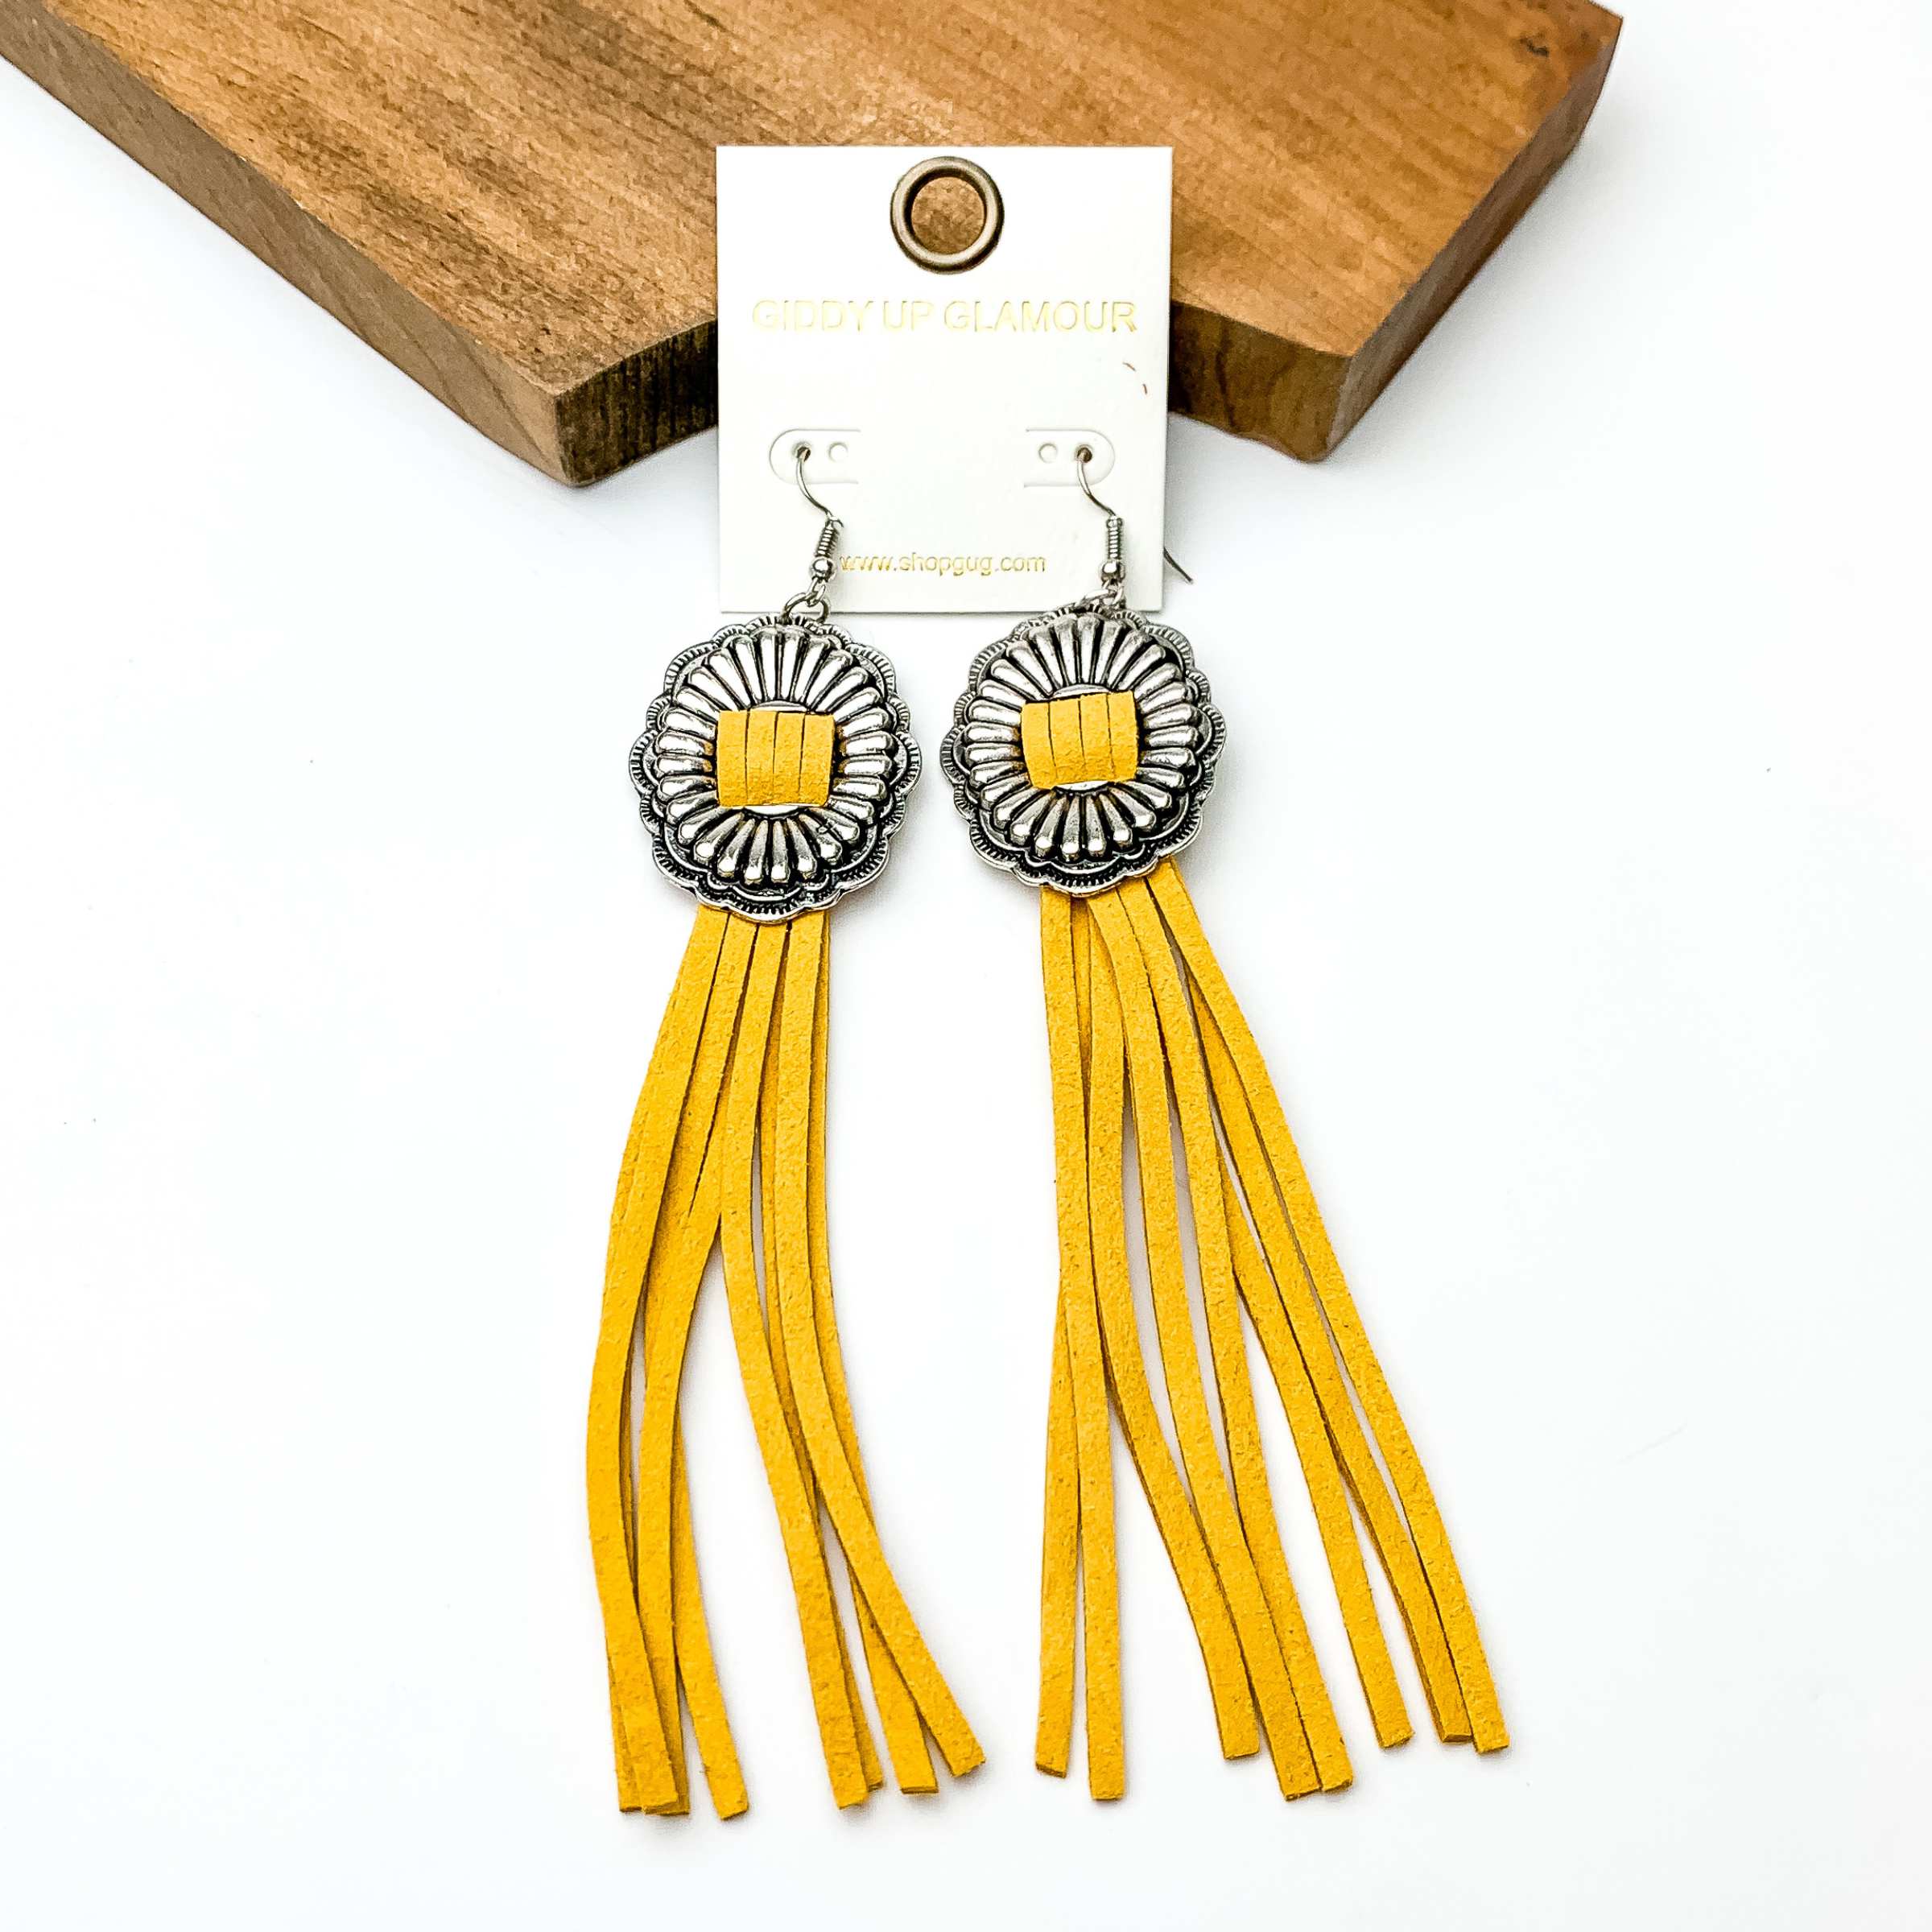 Silver concho dangle earrings with yellow tassels. These earrings are pictured on a white background with a brown block at the top of the picture. 